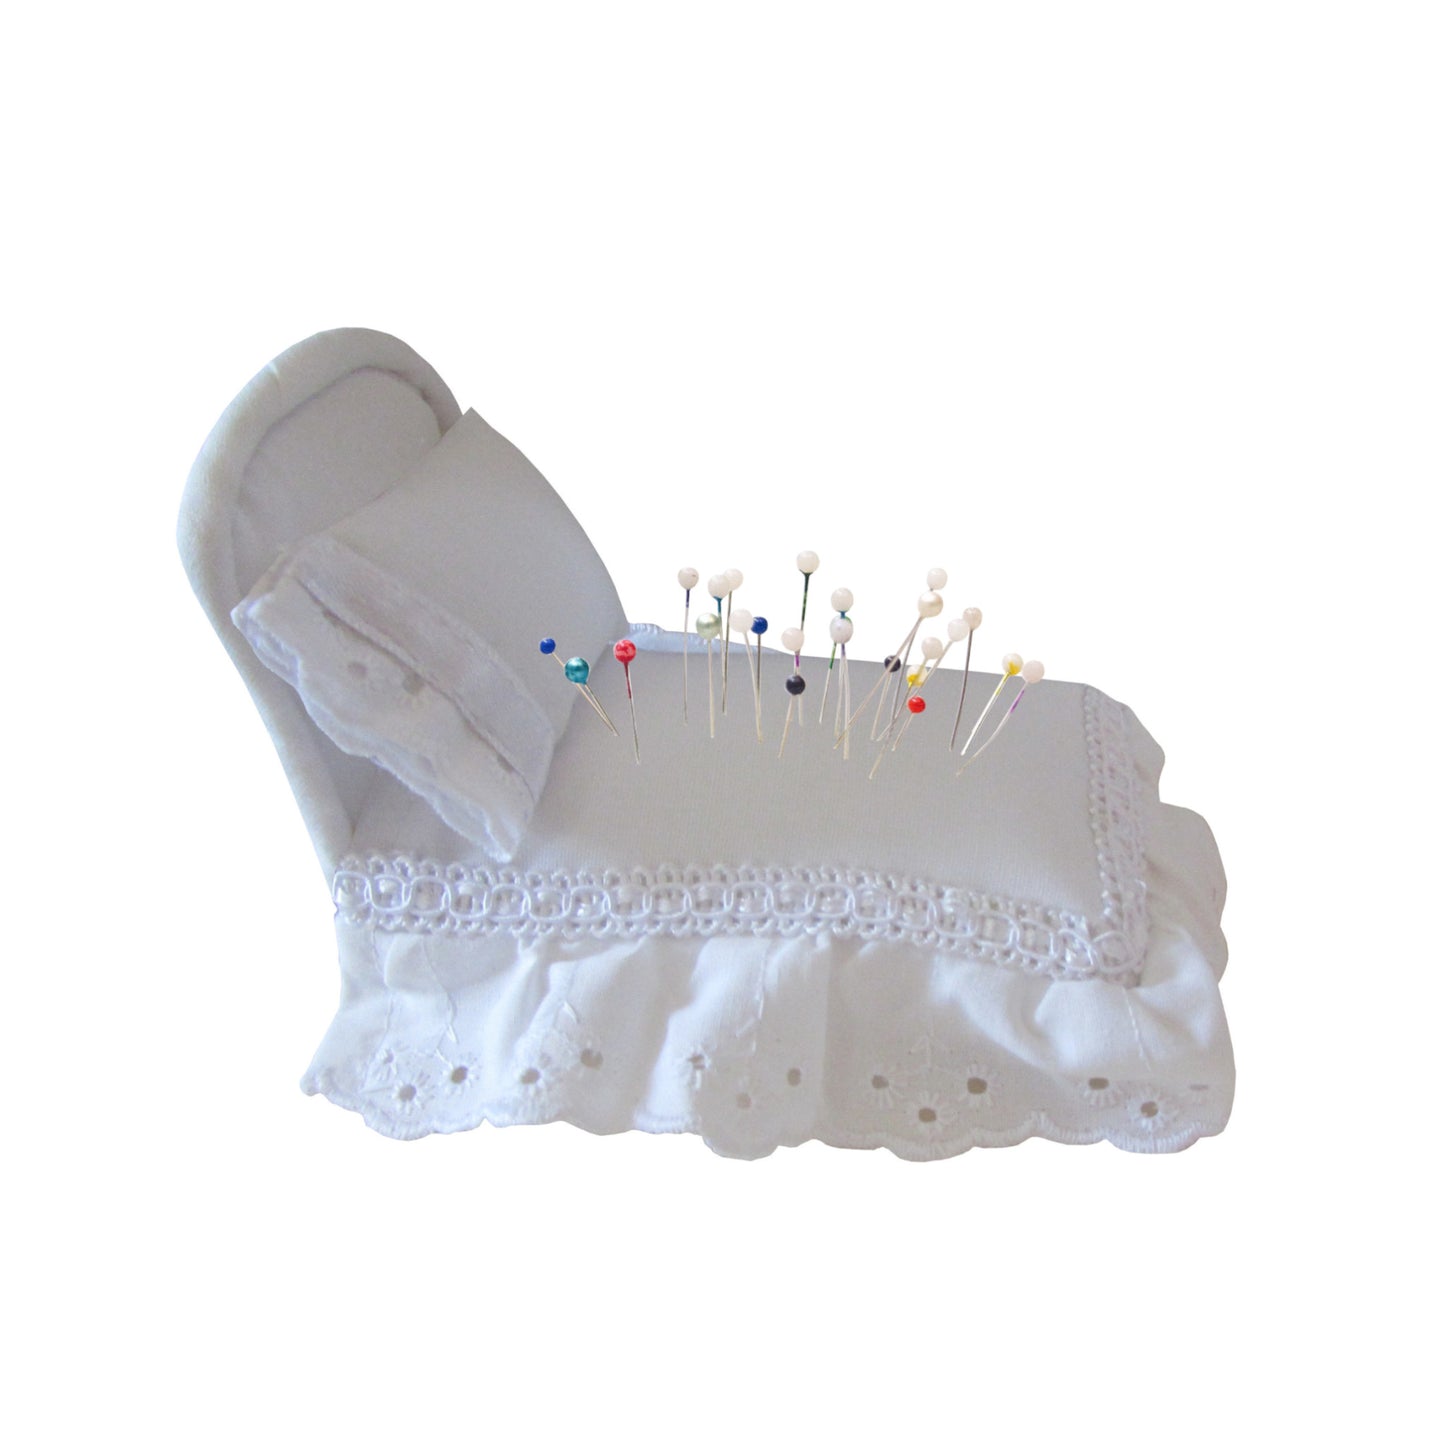 White Pincushion Bed with Lace-Trimmed Bedding Side view with pins